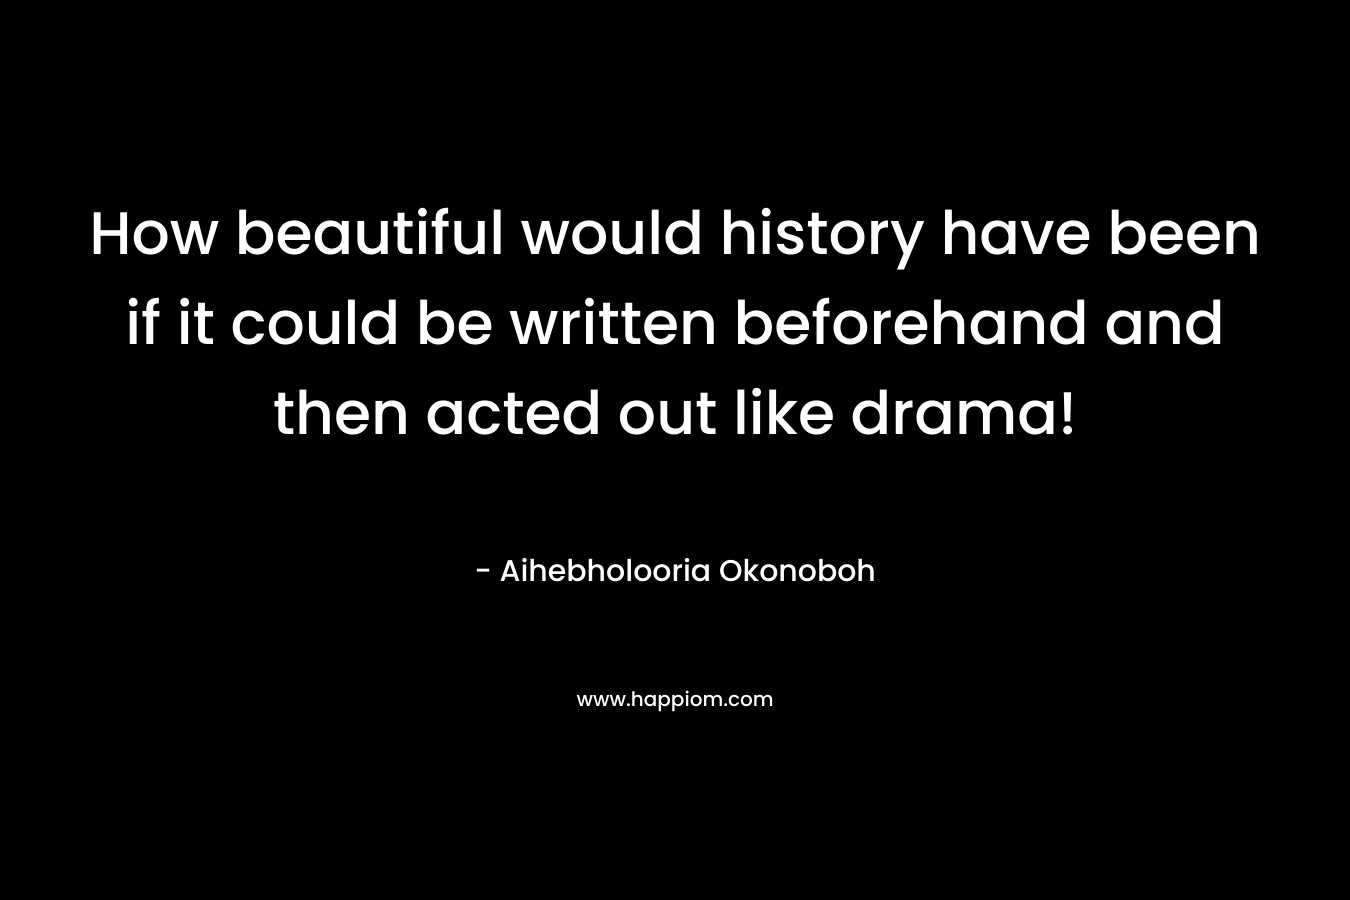 How beautiful would history have been if it could be written beforehand and then acted out like drama! – Aihebholooria Okonoboh